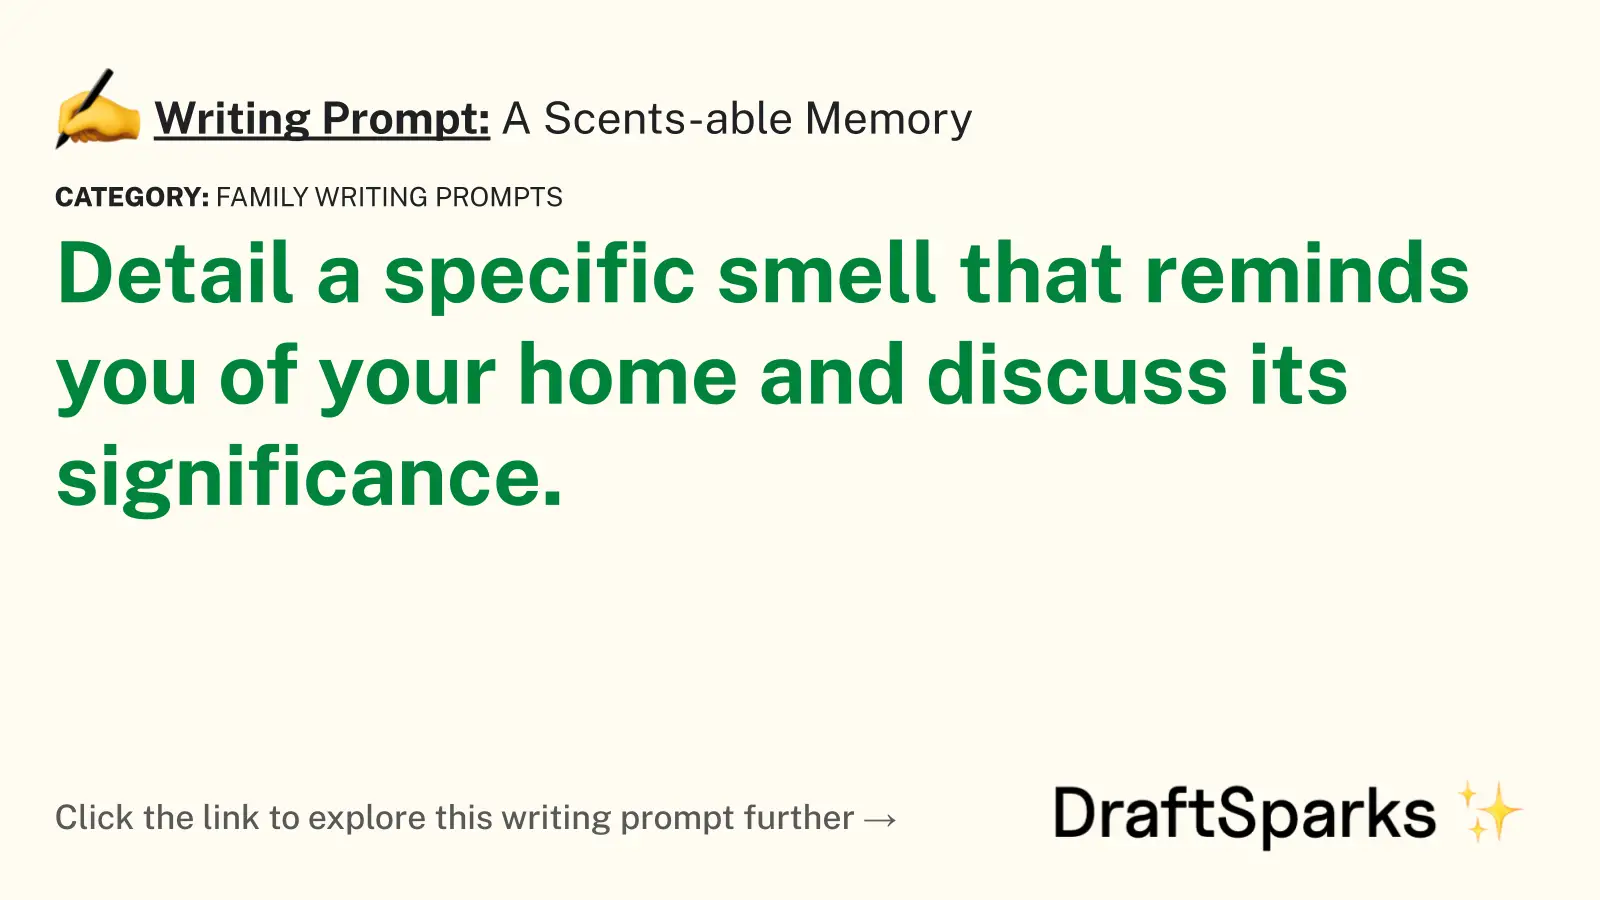 A Scents-able Memory